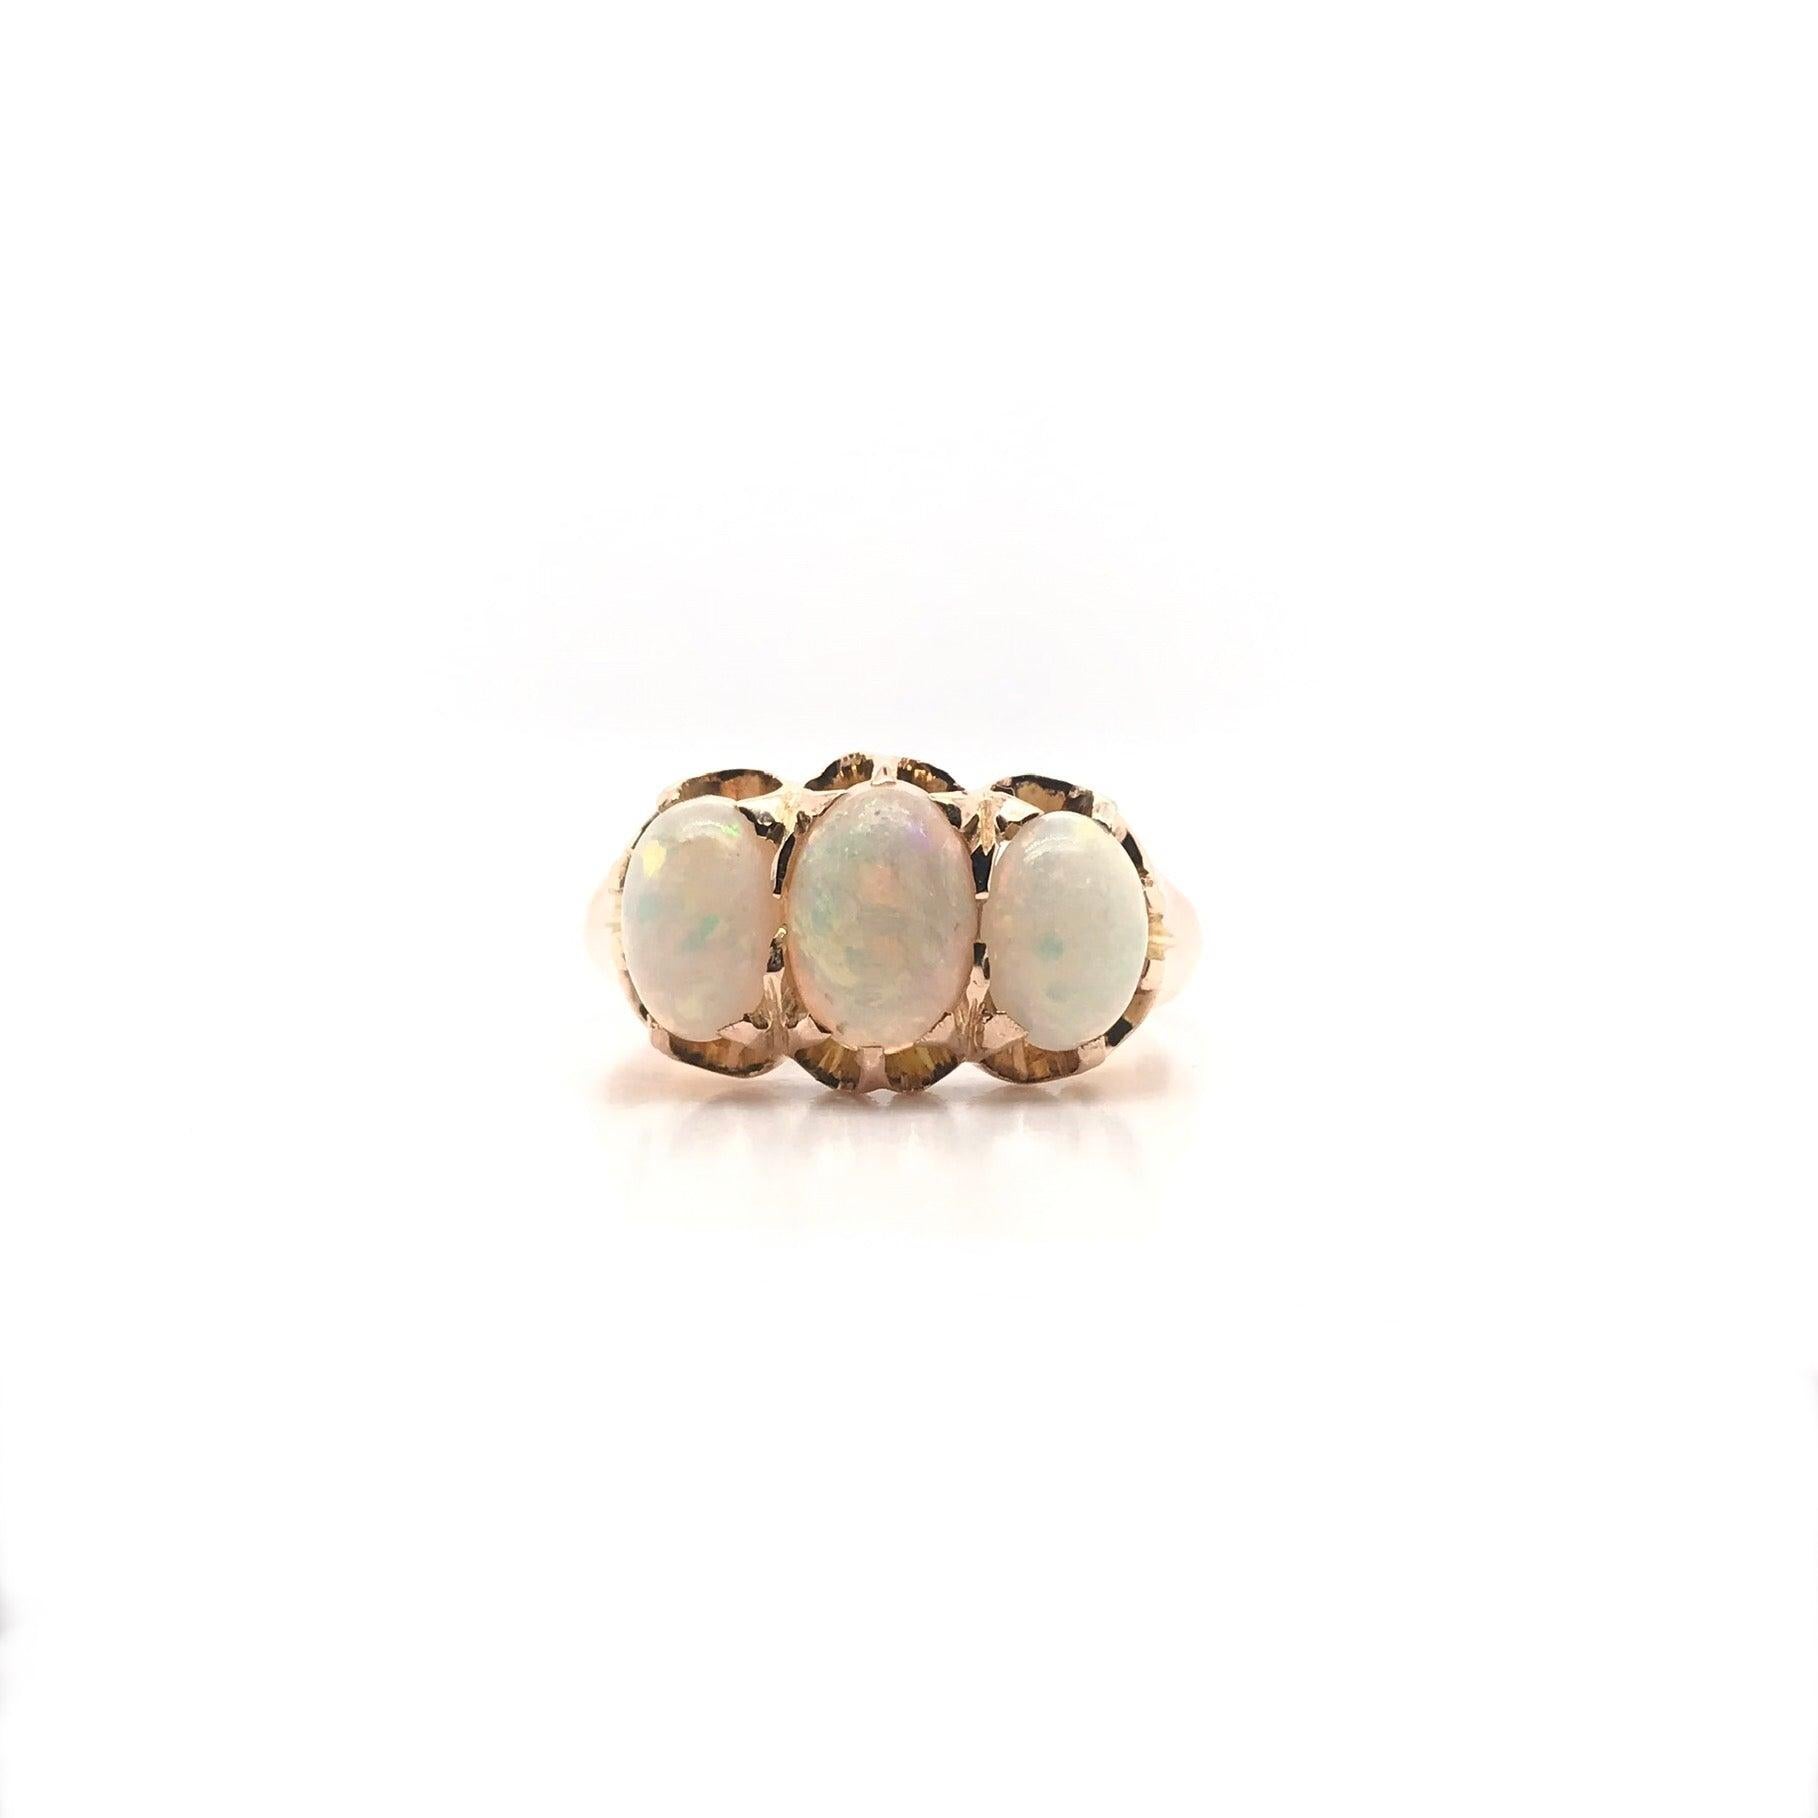 This antique piece was skillfully handcrafted sometime during the Victorian design period (1840-1900). The setting is 15K Victorian rose gold and features three oval white opals. The ring features gorgeous Belcher style (sometimes also referred to